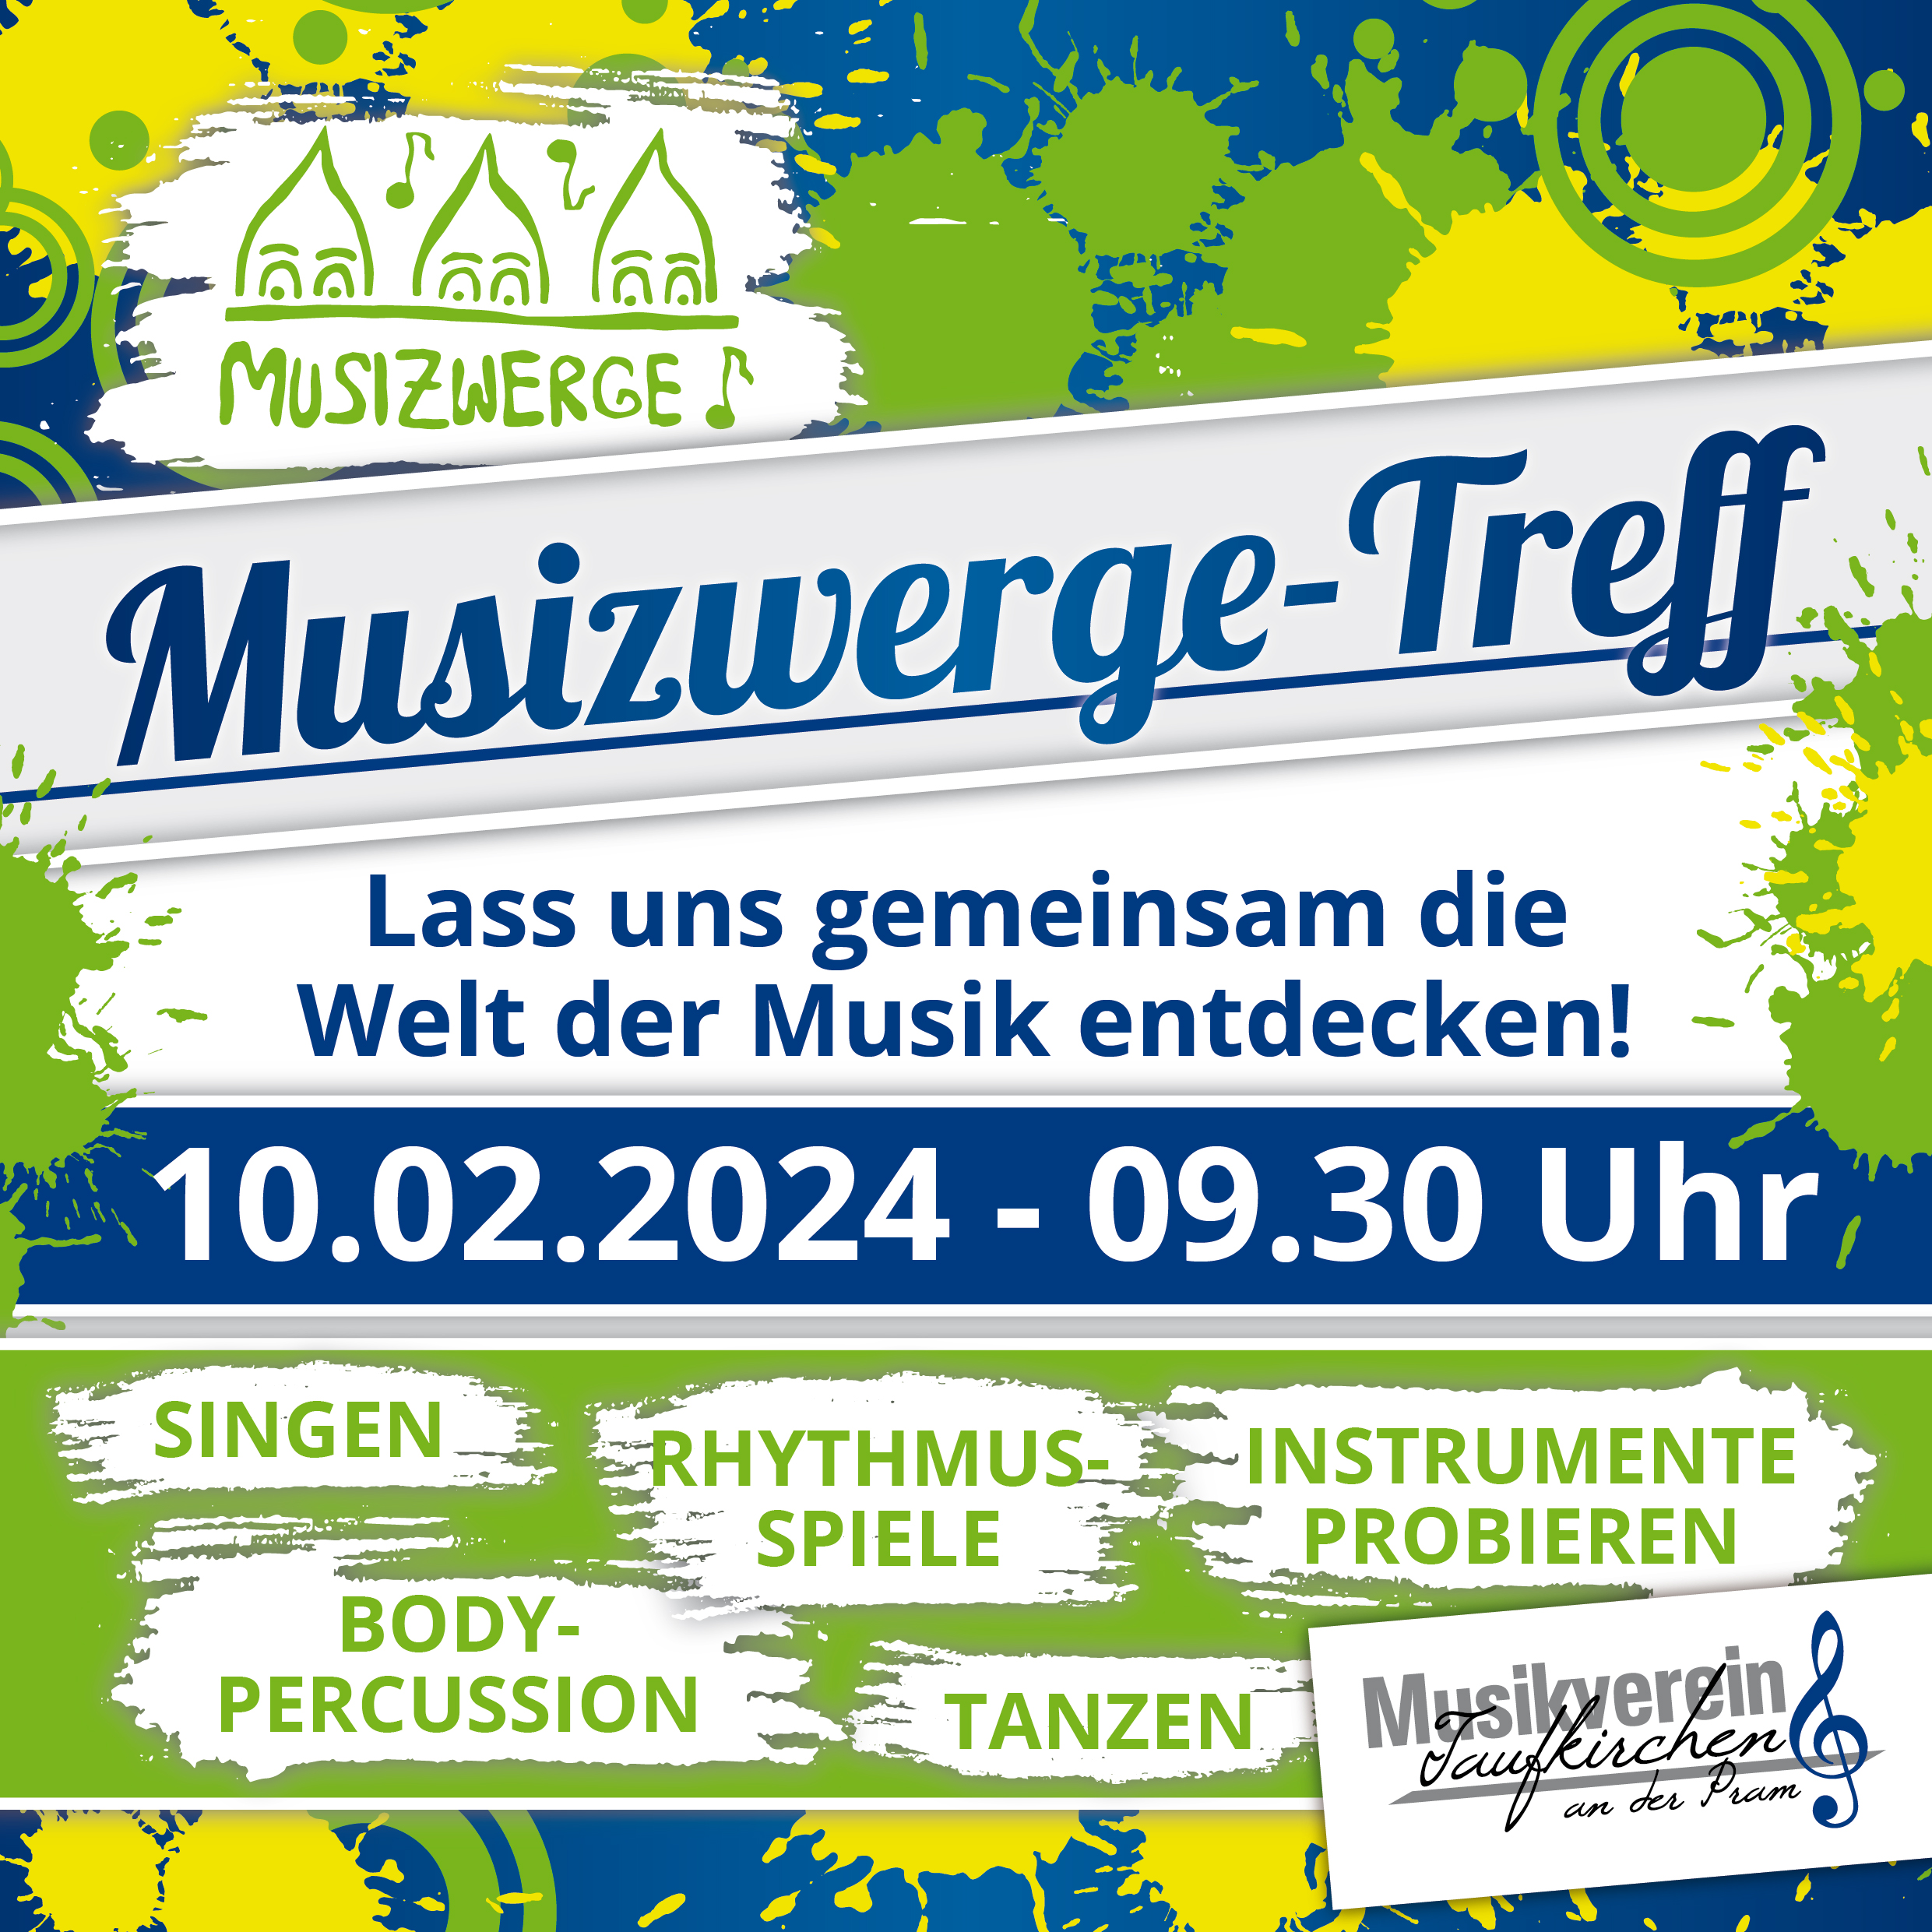 You are currently viewing Musizwerge-Treff 10.02.2024